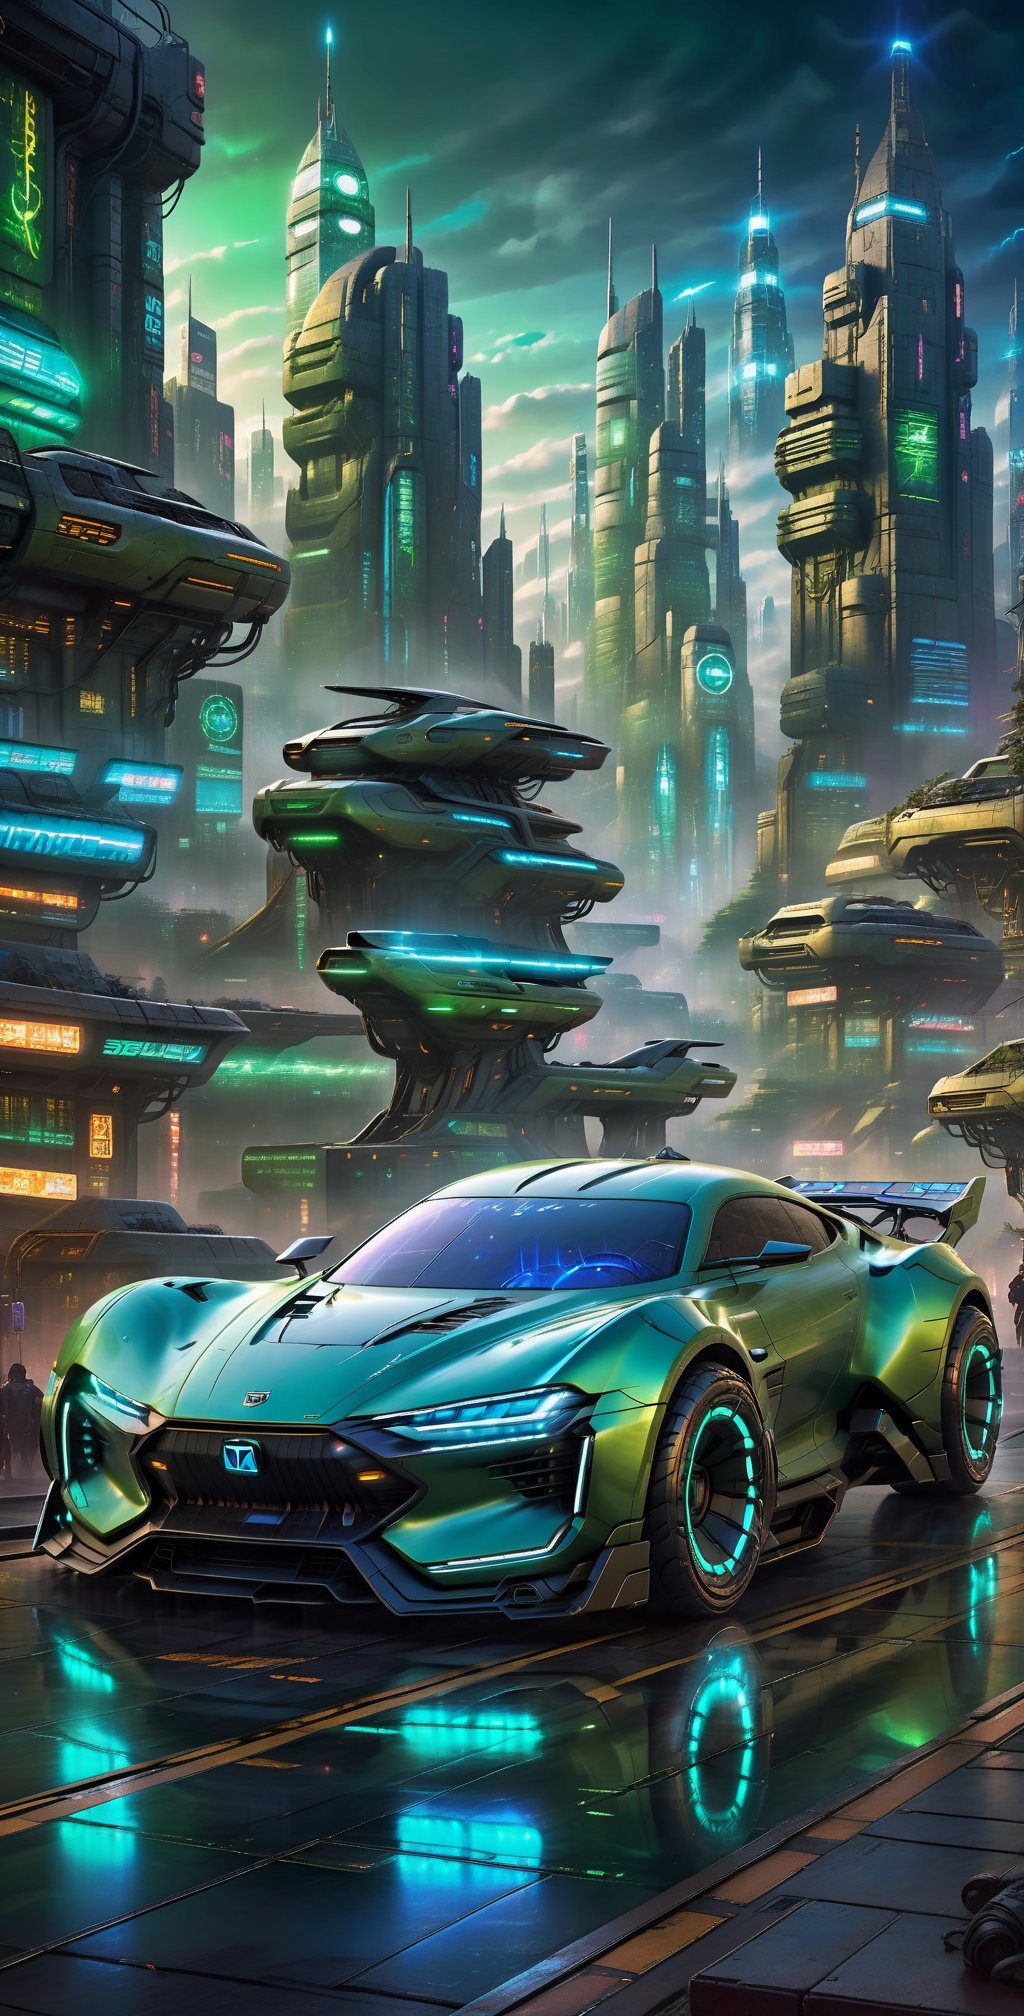 "A futuristic, cyberpunk-inspired car in shades of green and black, its sleek contours accentuated by pulsating blue lights that outline the tires and cast an eerie glow on the surrounding urban landscape." City dark background, 